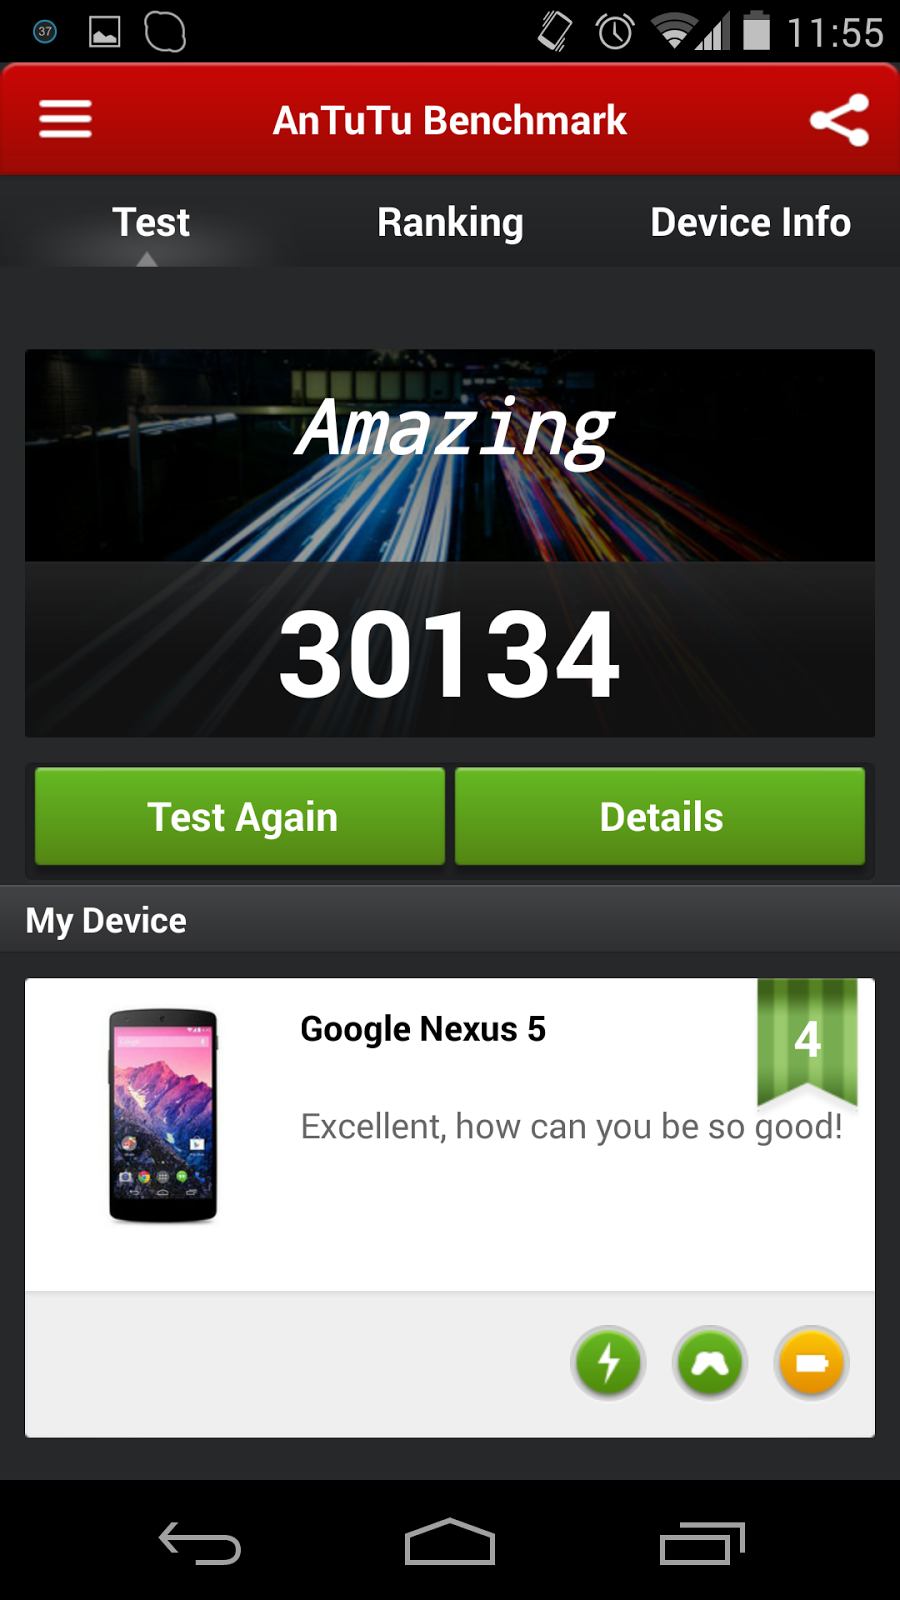 Google+LG+Nexus+5+Android+KitKat+Review+Handson+Detailed+Benchmark++%25281%2529.png